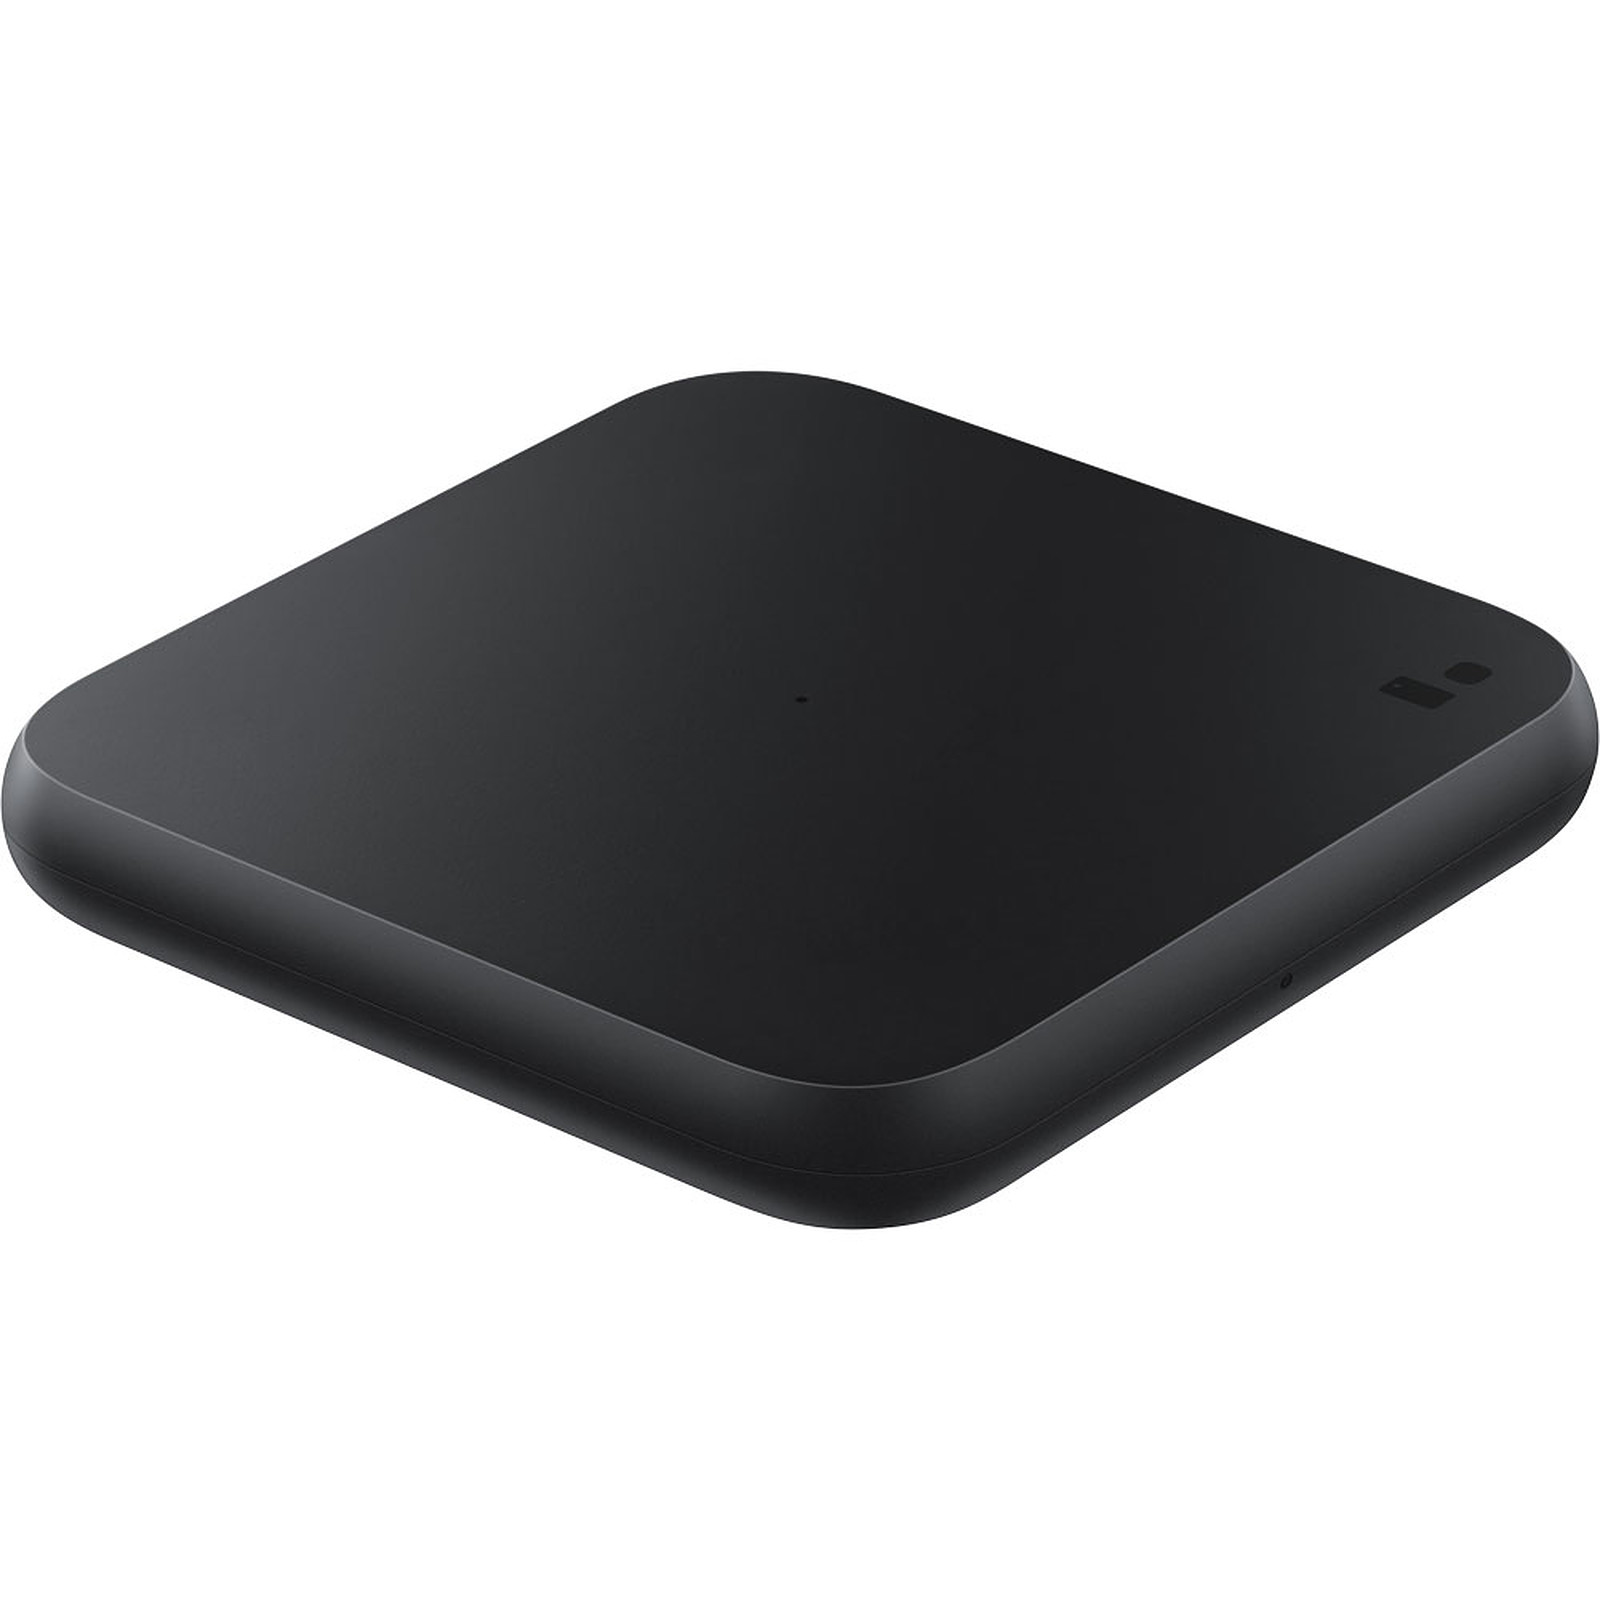 Samsung Wireless Charger Pad P1300